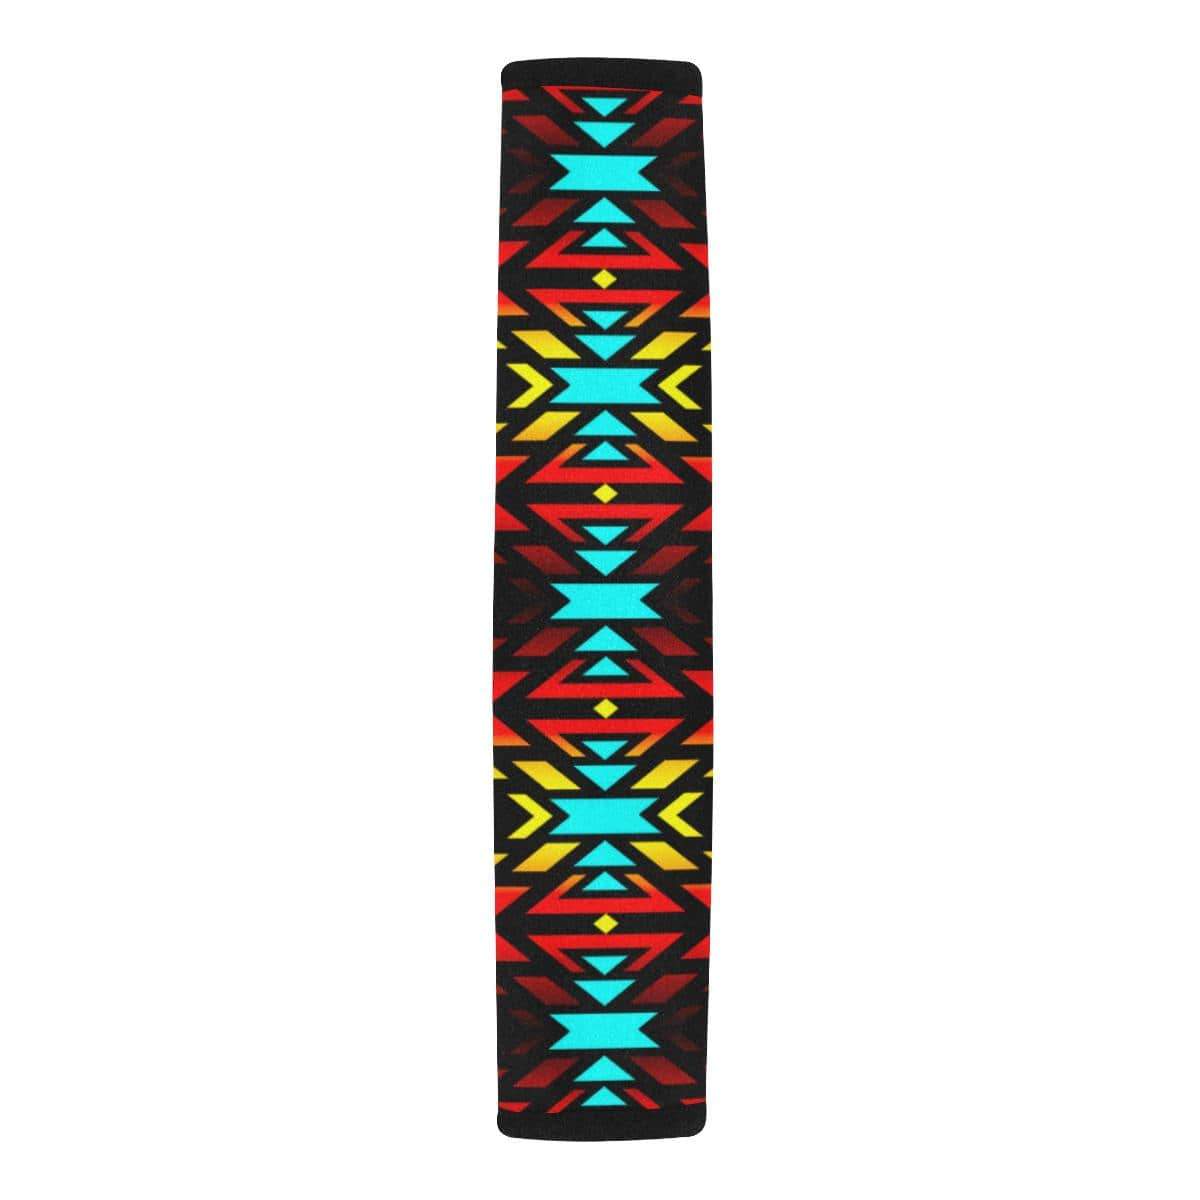 Black Fire and Turquoise Car Seat Belt Cover 7''x12.6'' Car Seat Belt Cover 7''x12.6'' e-joyer 